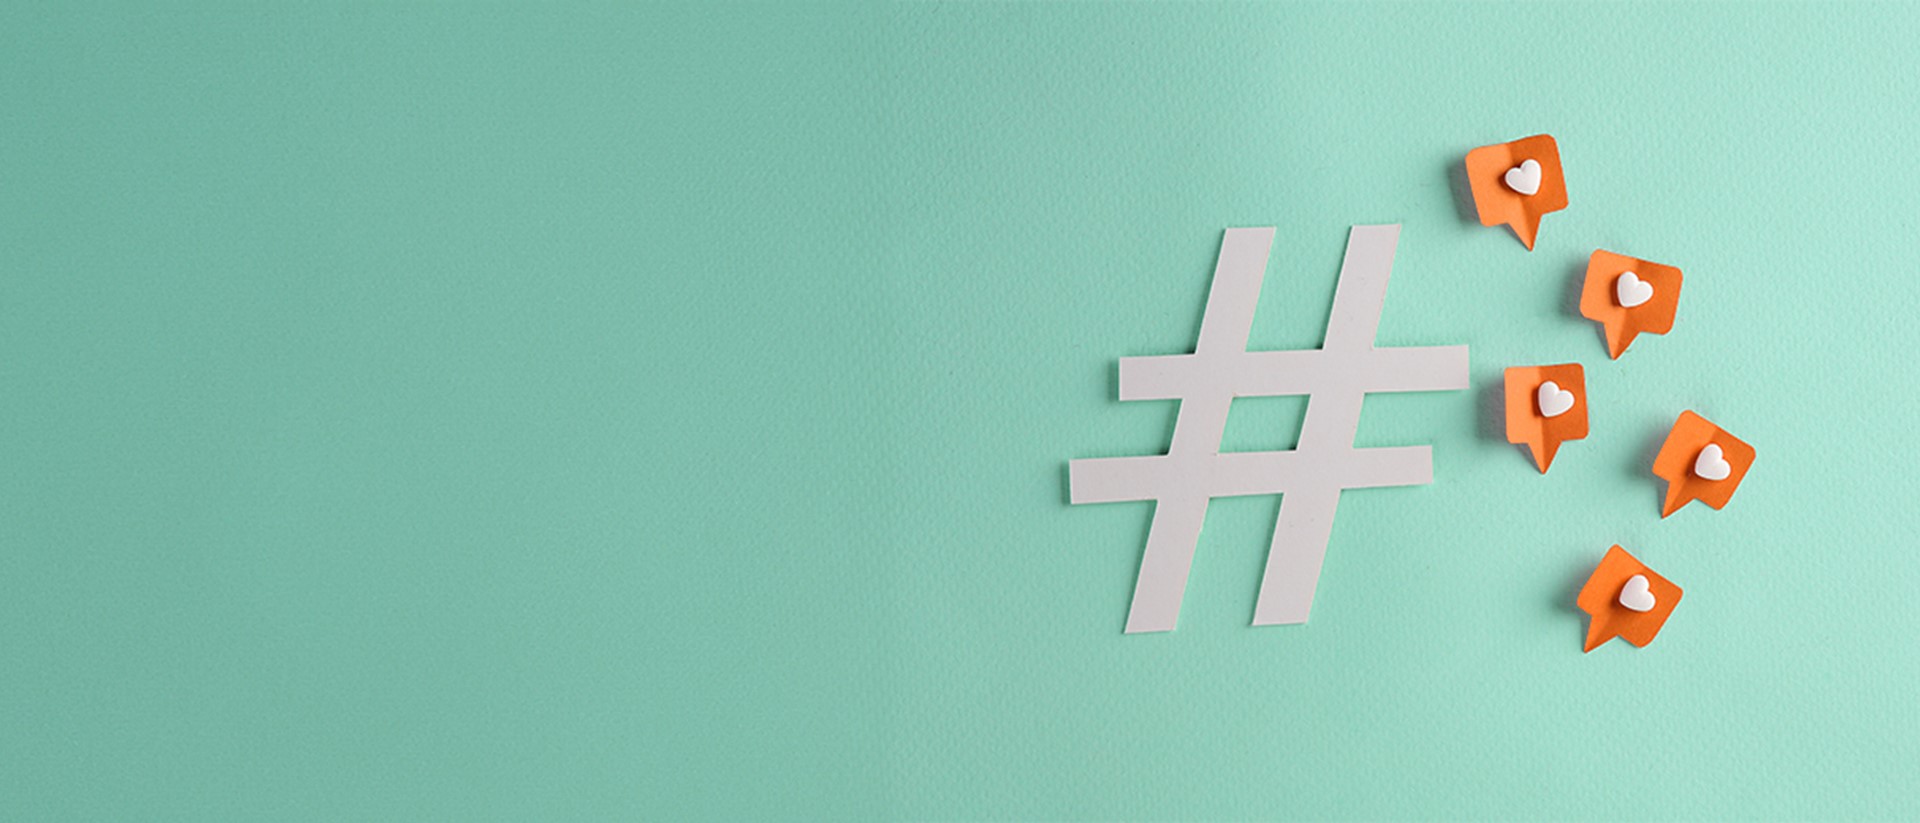 A white hashtag symbol with five social "like" icons to the right against a teal background